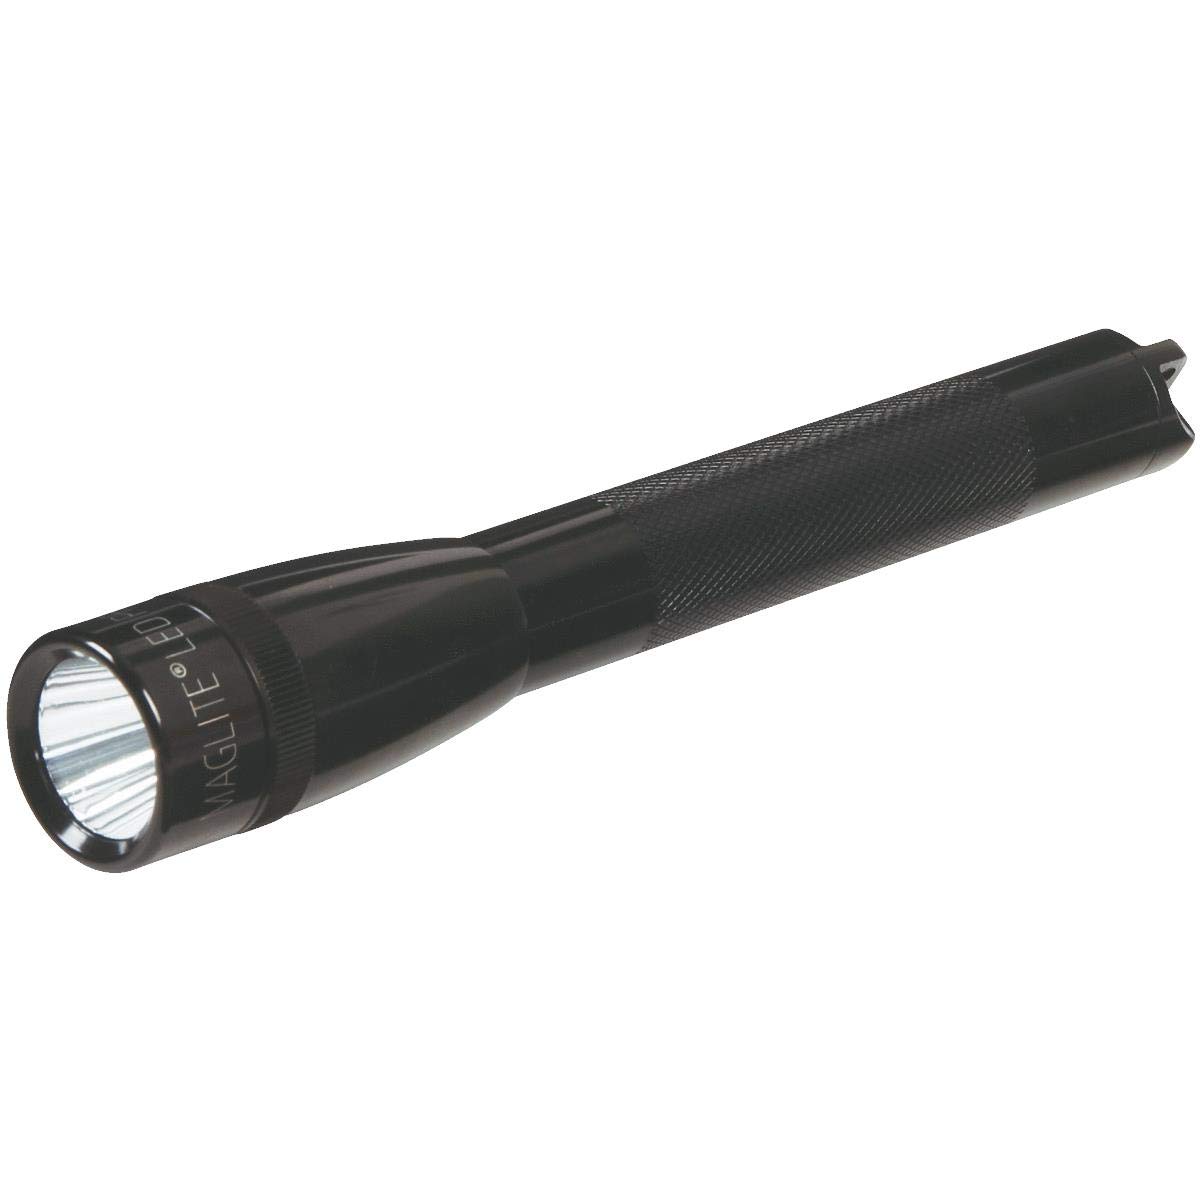 uitspraak Portaal Mus Mini Maglite LED Flashlight 2Cell AA With Holster | Aircraft Spruce